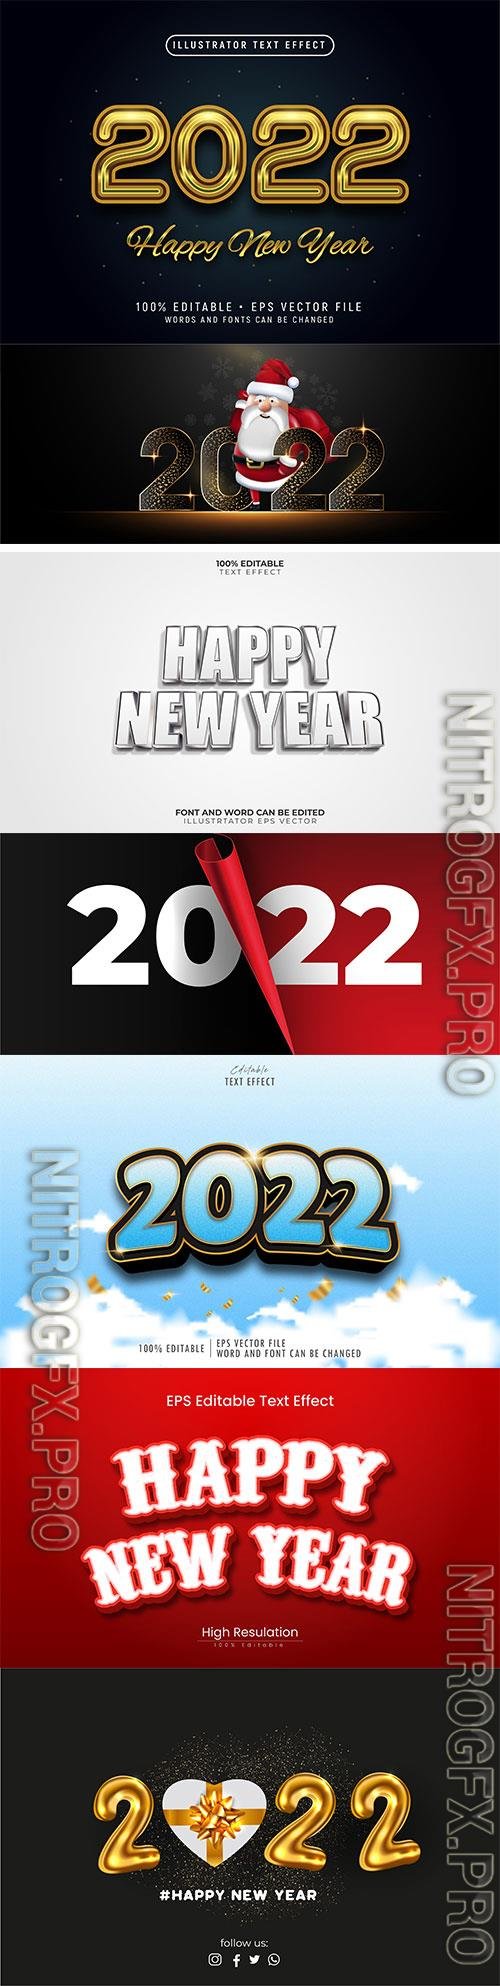 Happy New Year 2022 3D text effect template vector